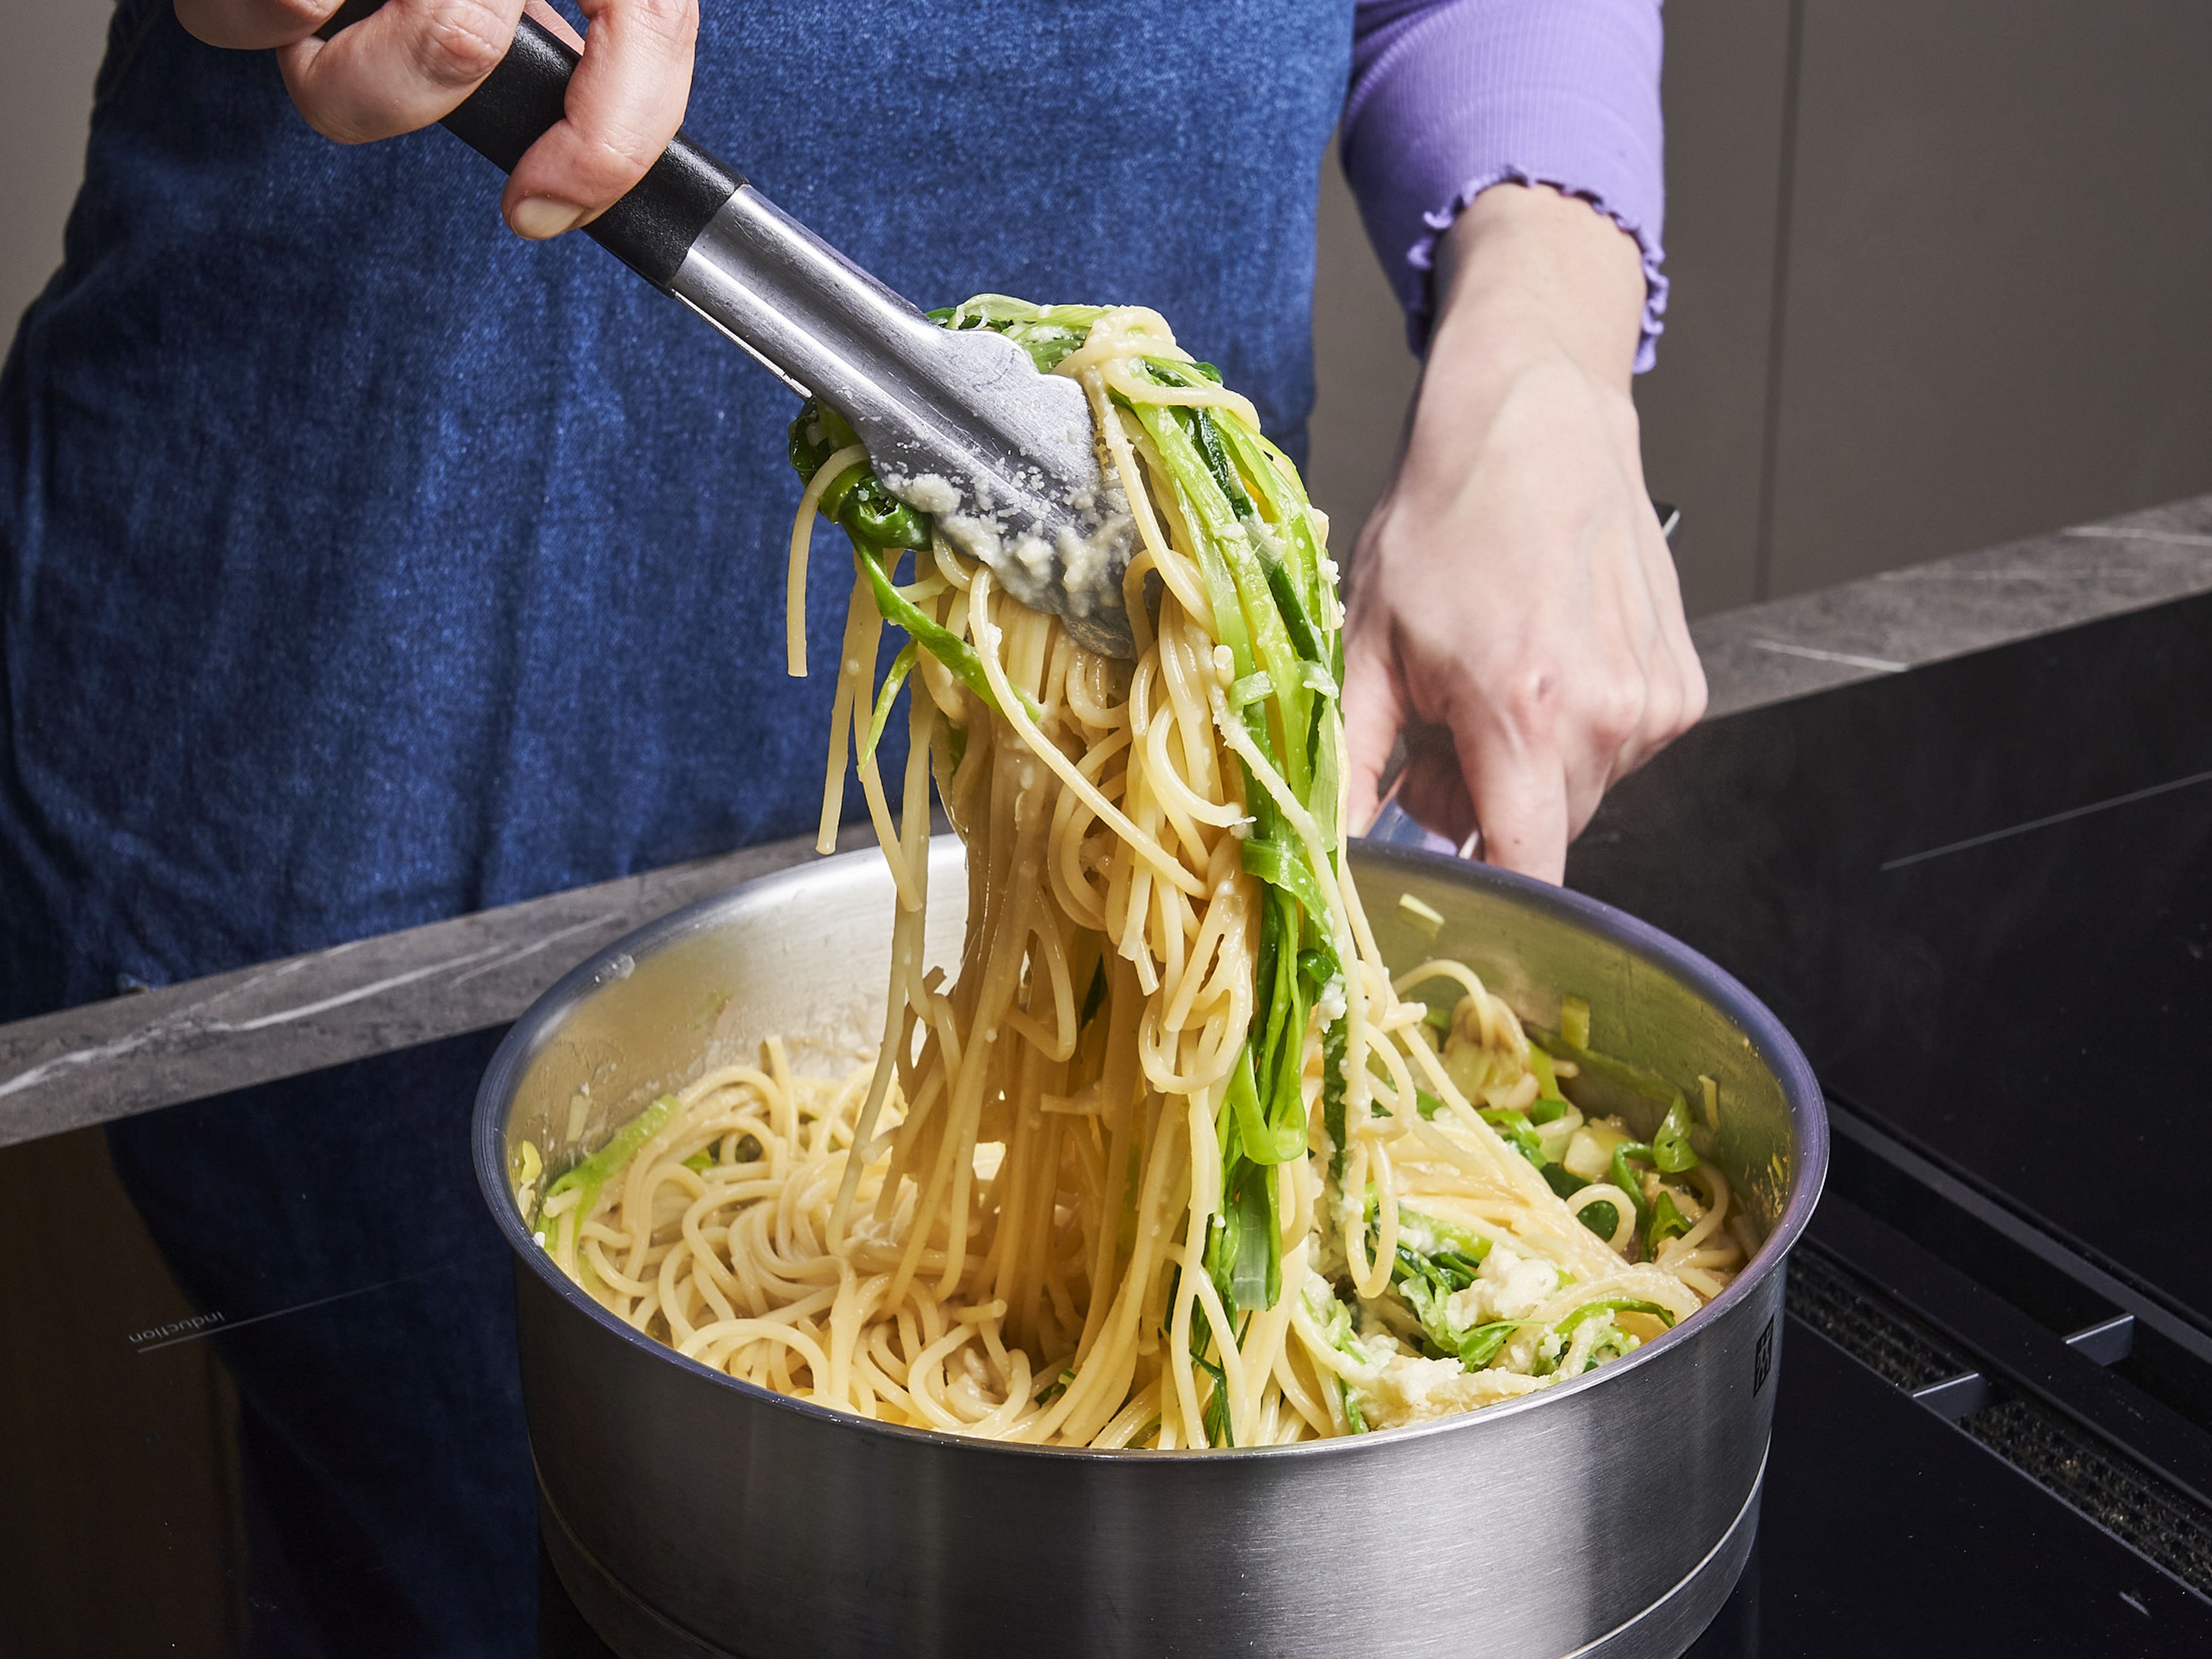 Add miso paste, parmesan, drained pasta with leek strips to leek whites and mix well over medium heat. Add in pasta water until a glossy sauce forms to your liking. Serve with extra parmesan on top and pepper.